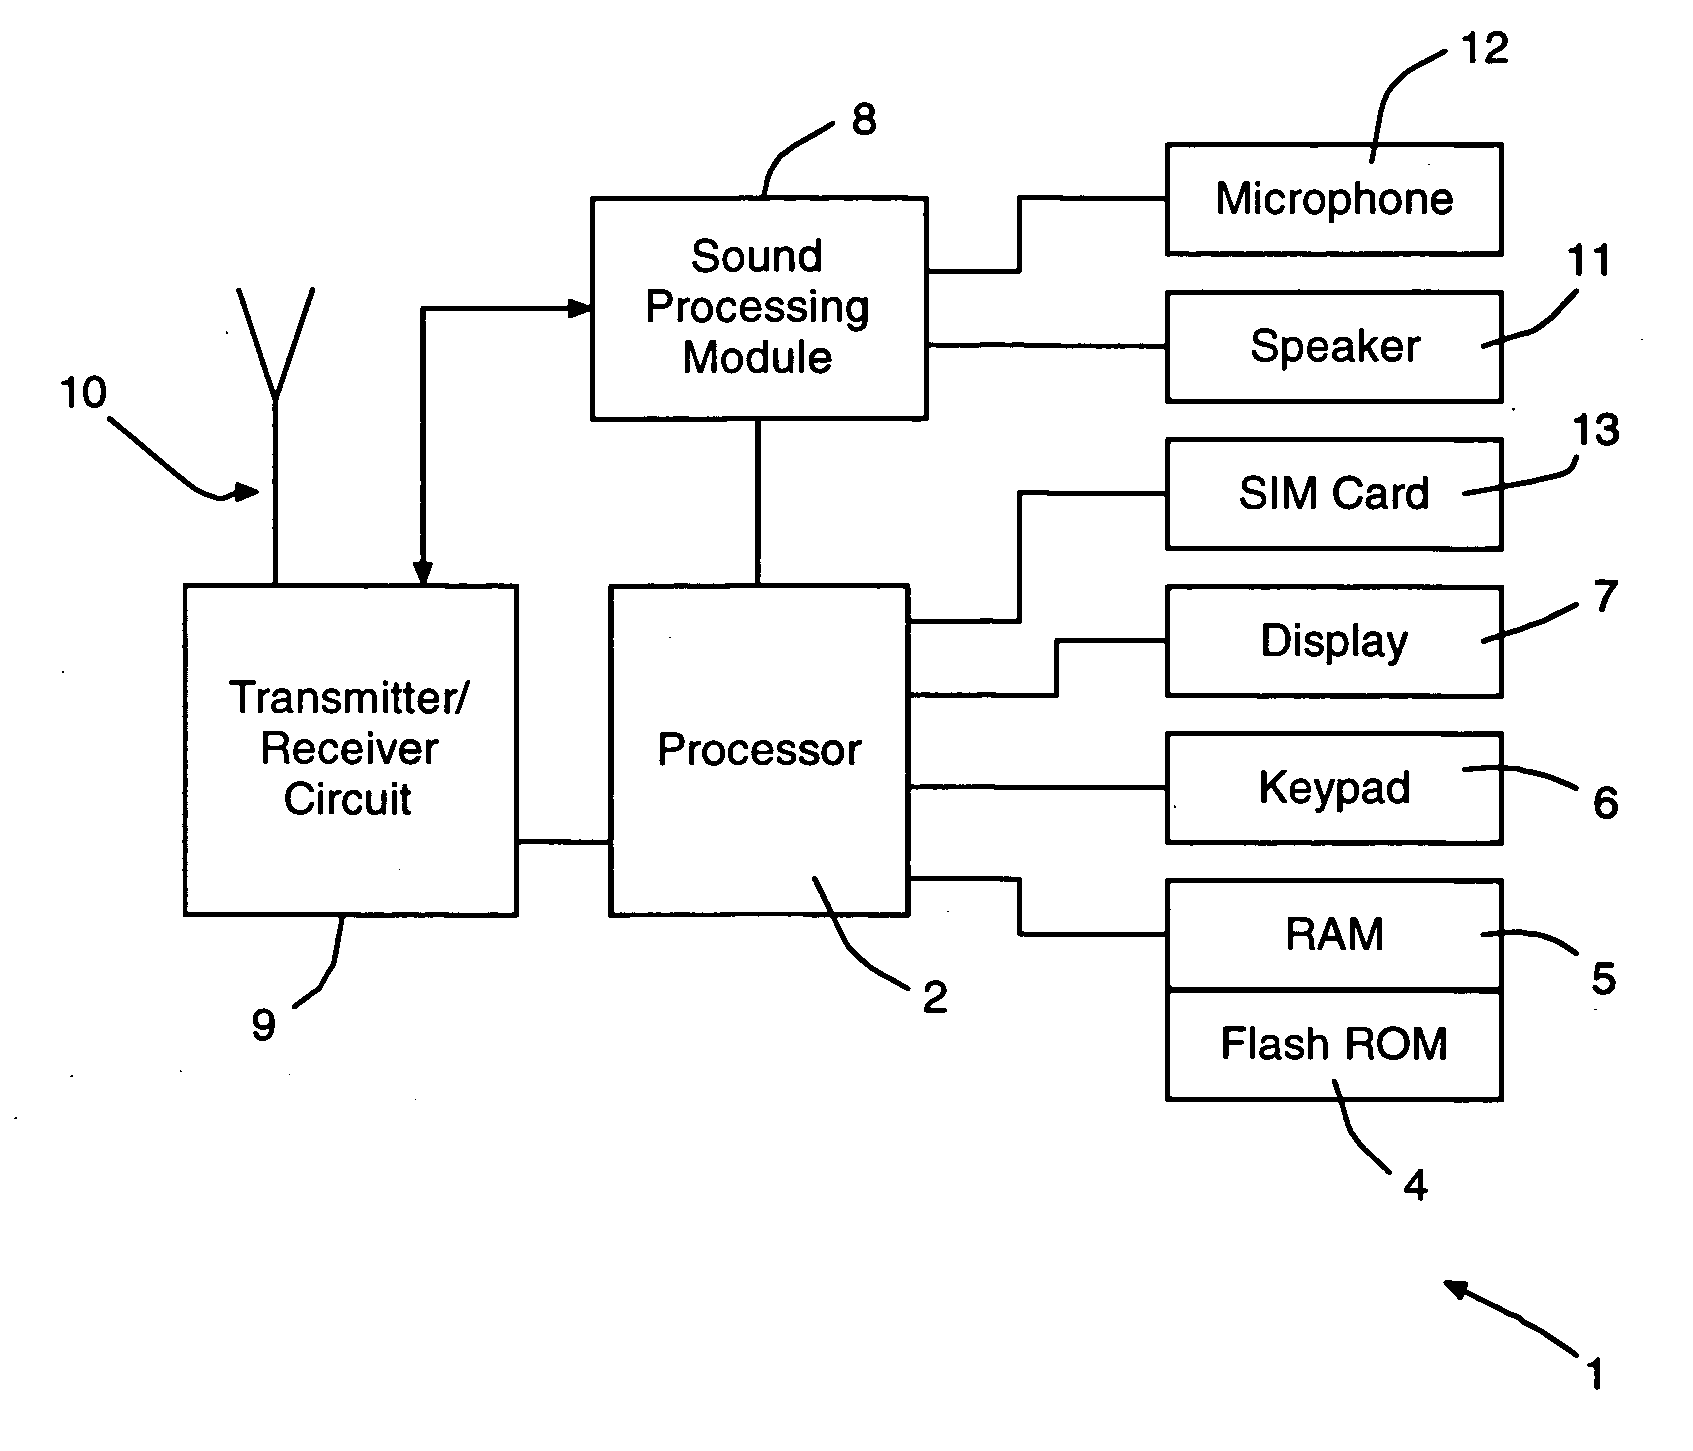 Push-to-talk mobile communication terminals